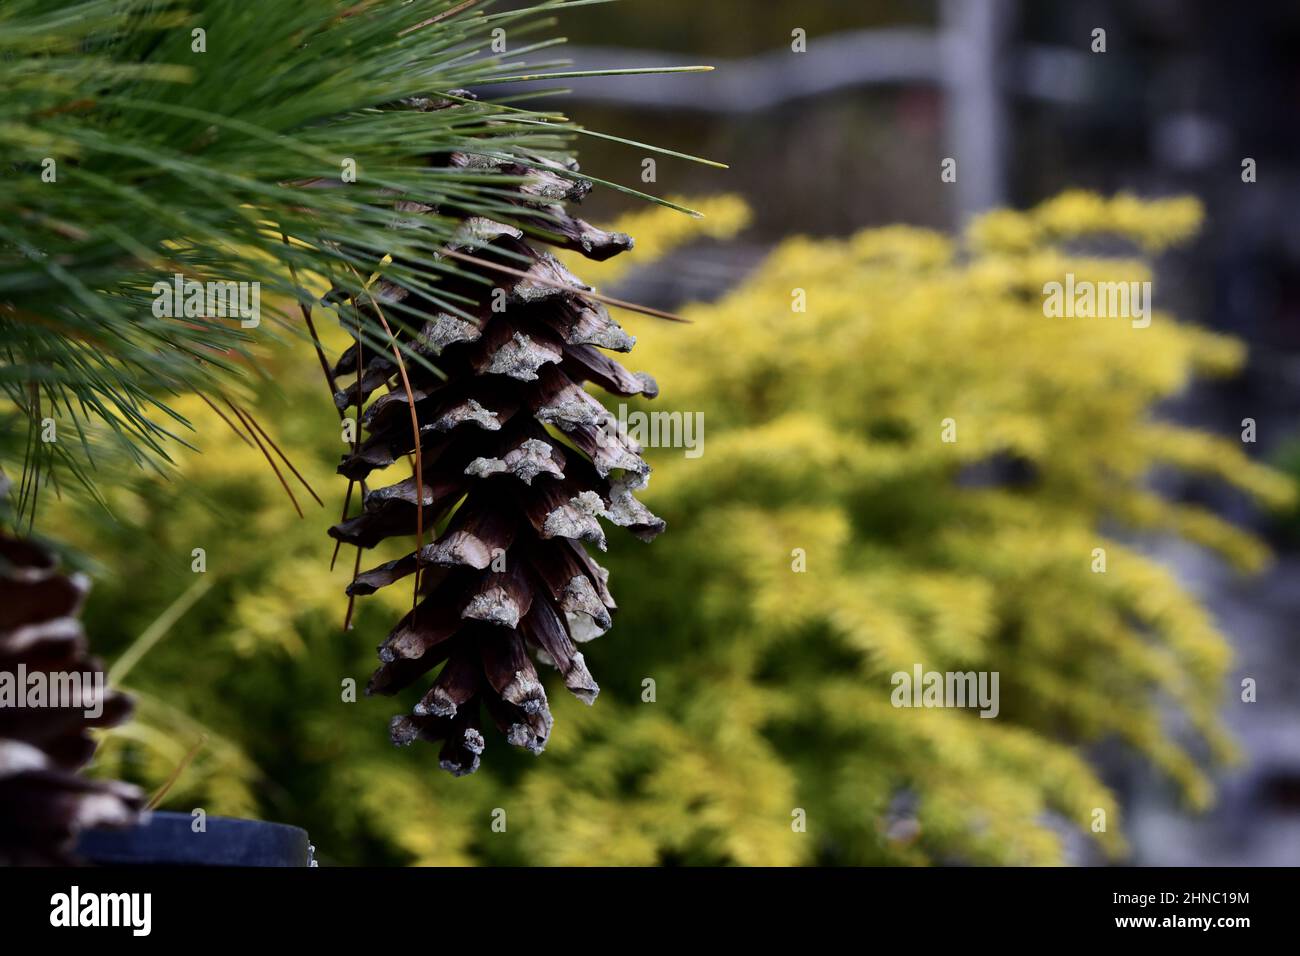 Closeup shot of a cone of a Pinus schwerinii pine on a blurred background Stock Photo